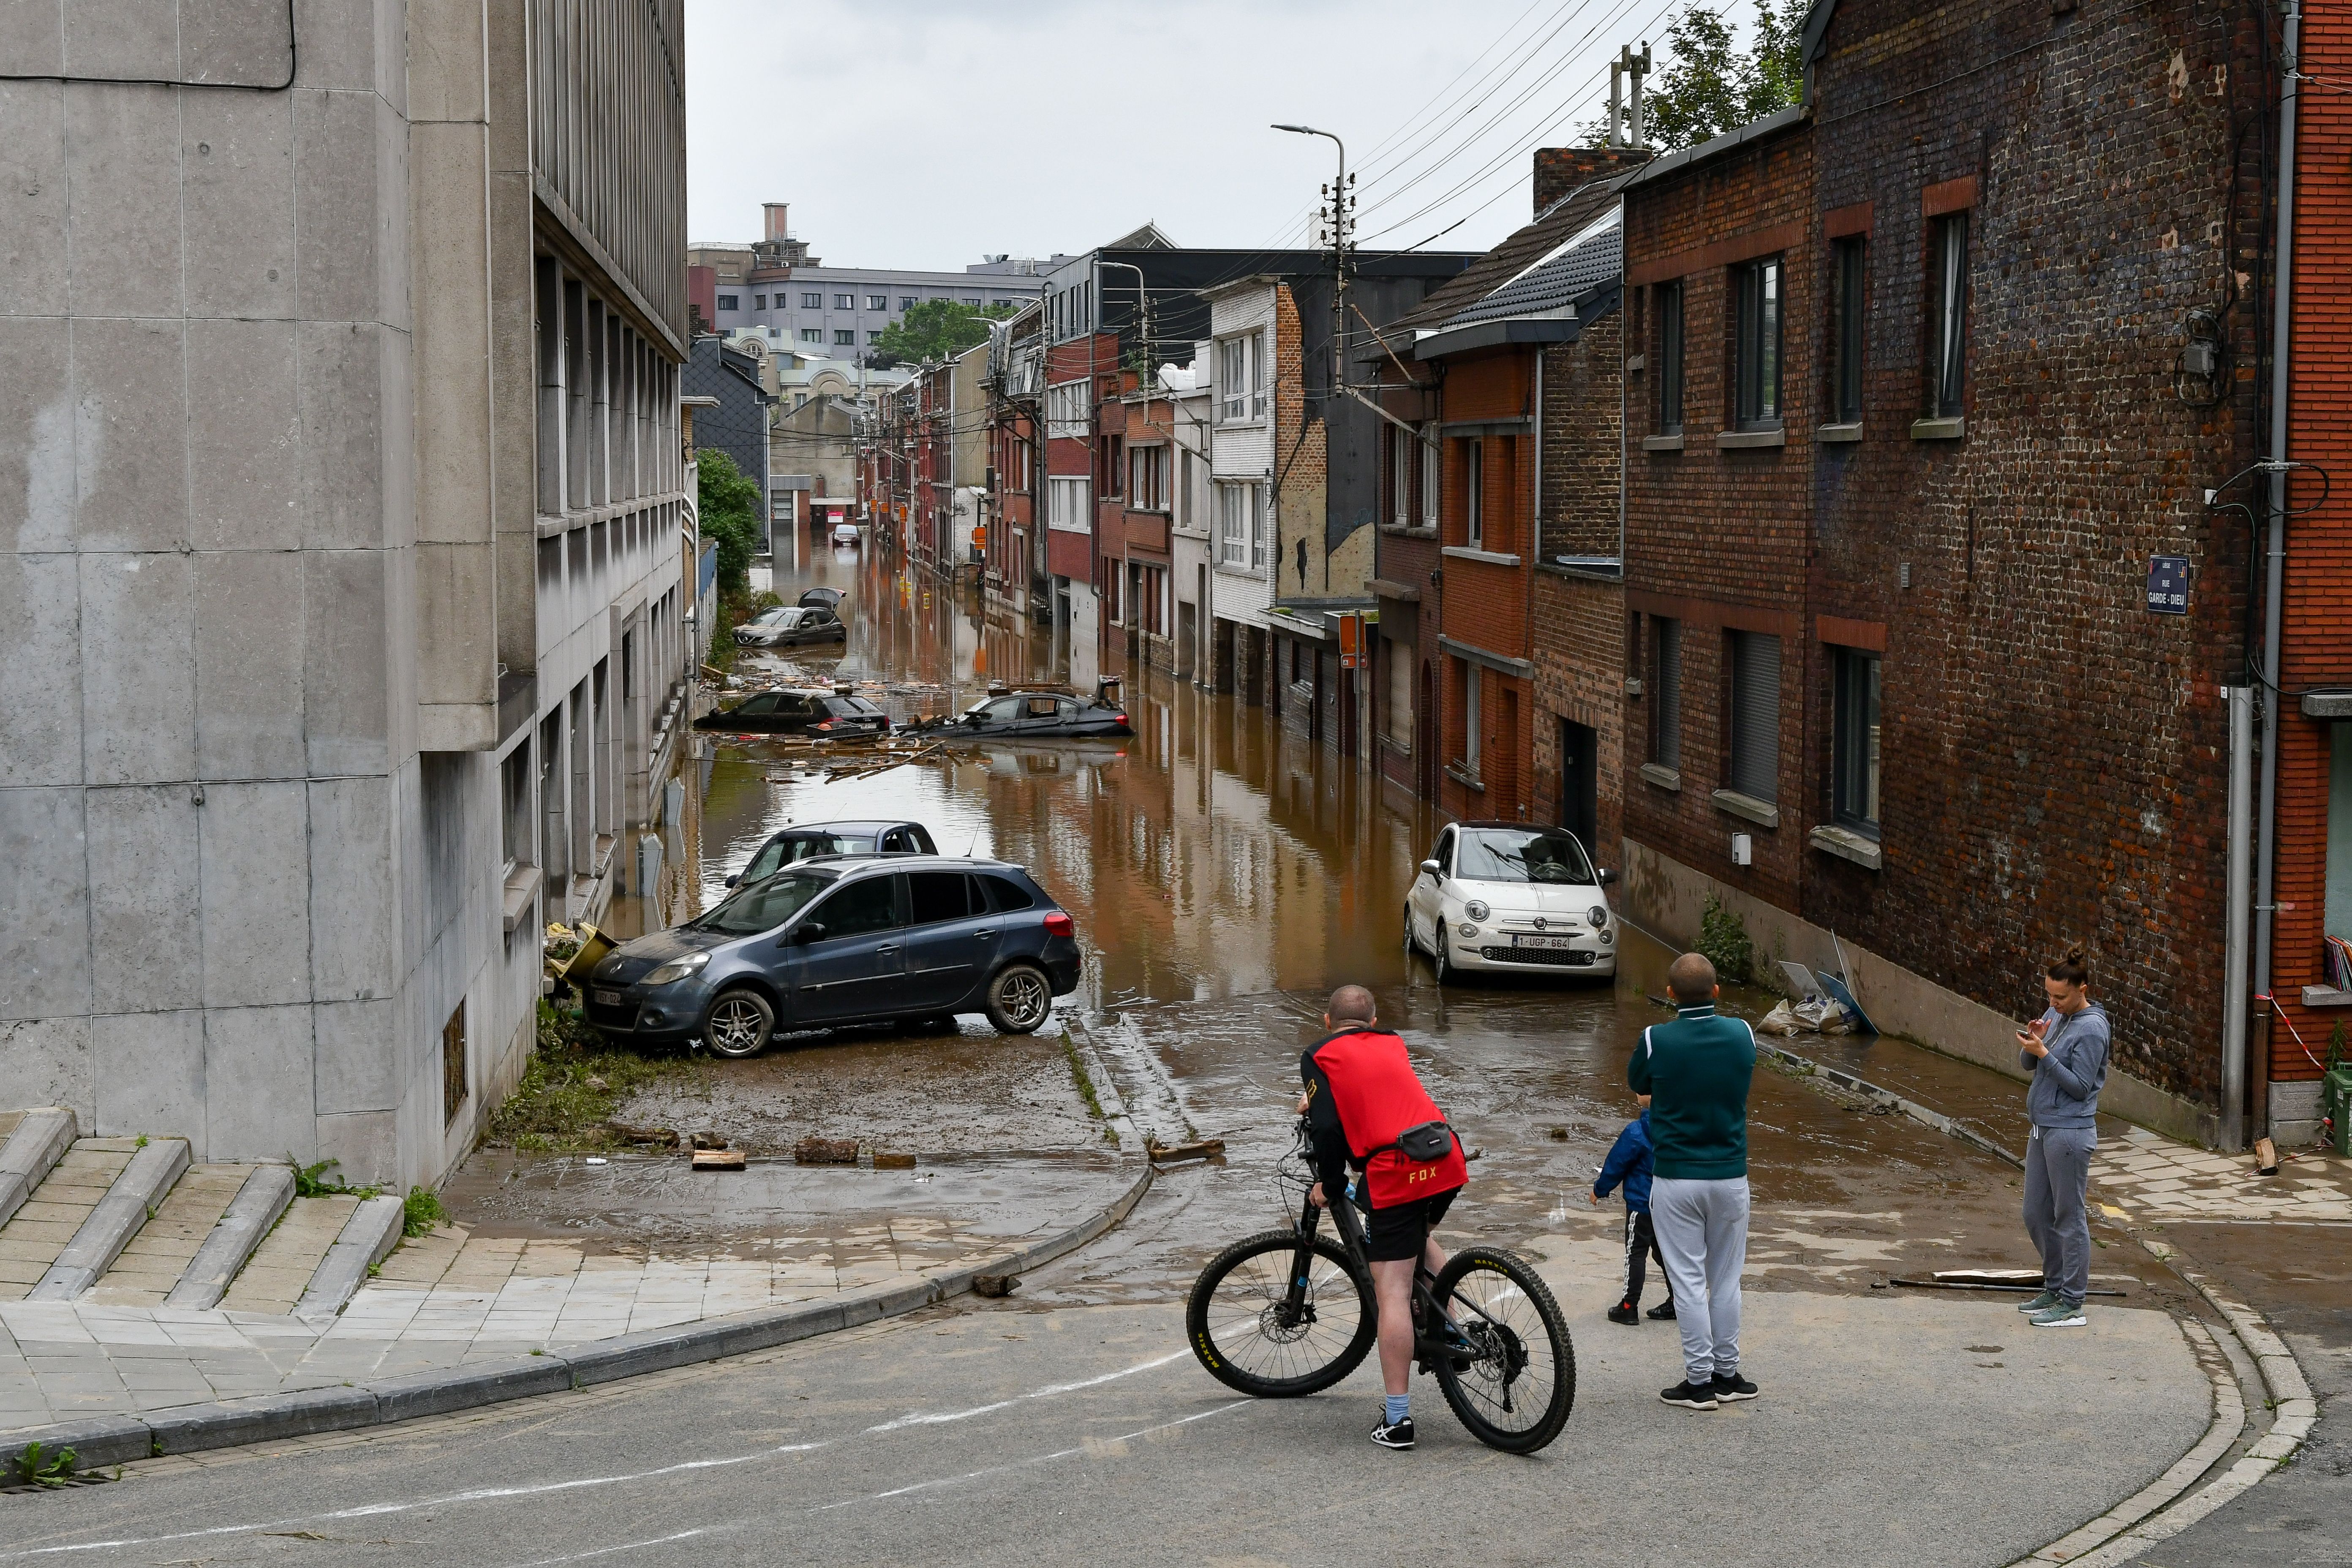 Damage caused by floods in Liege after the heavy rainfall of the past days